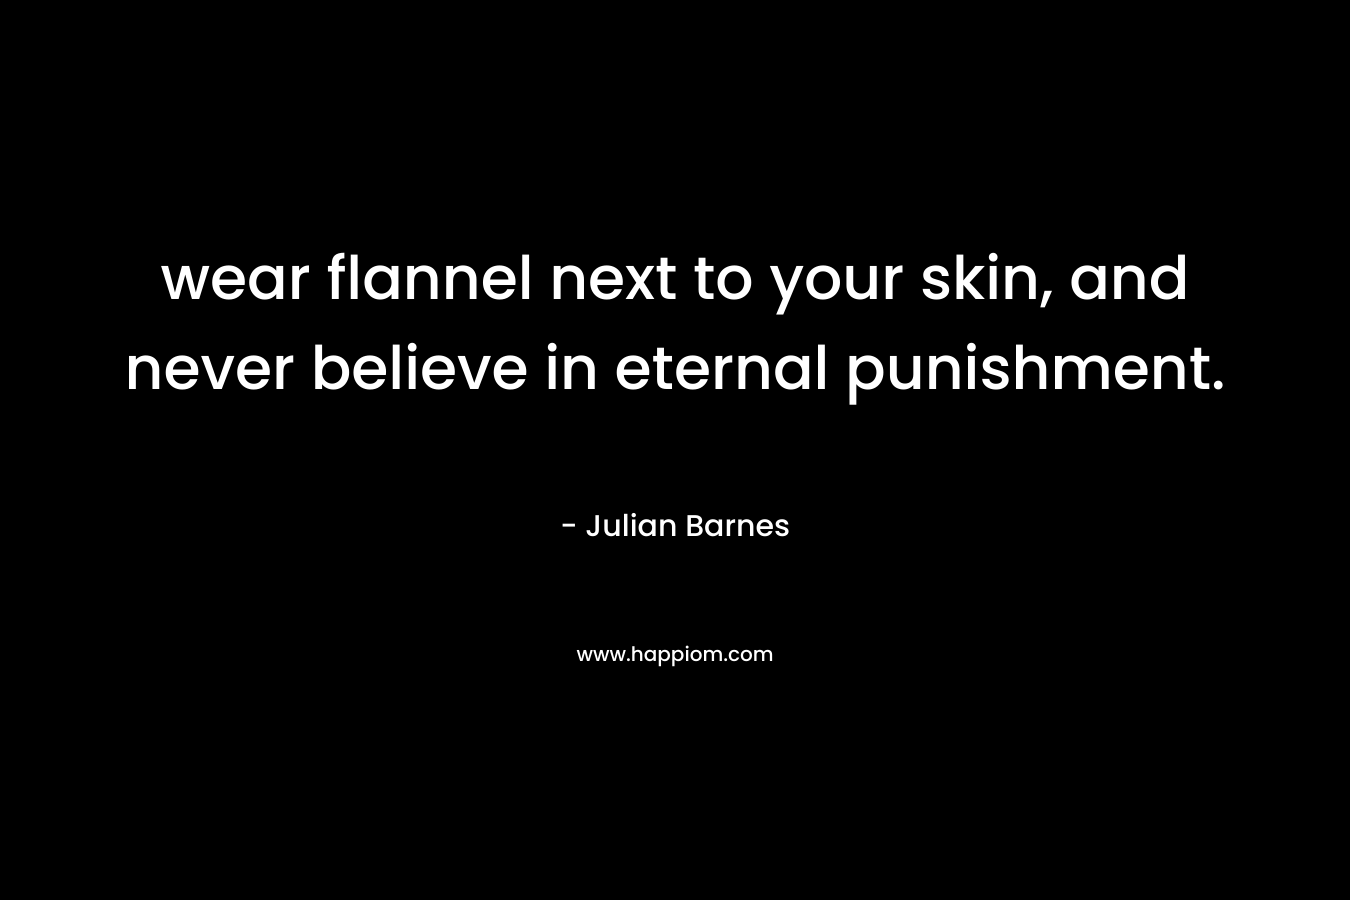 wear flannel next to your skin, and never believe in eternal punishment.